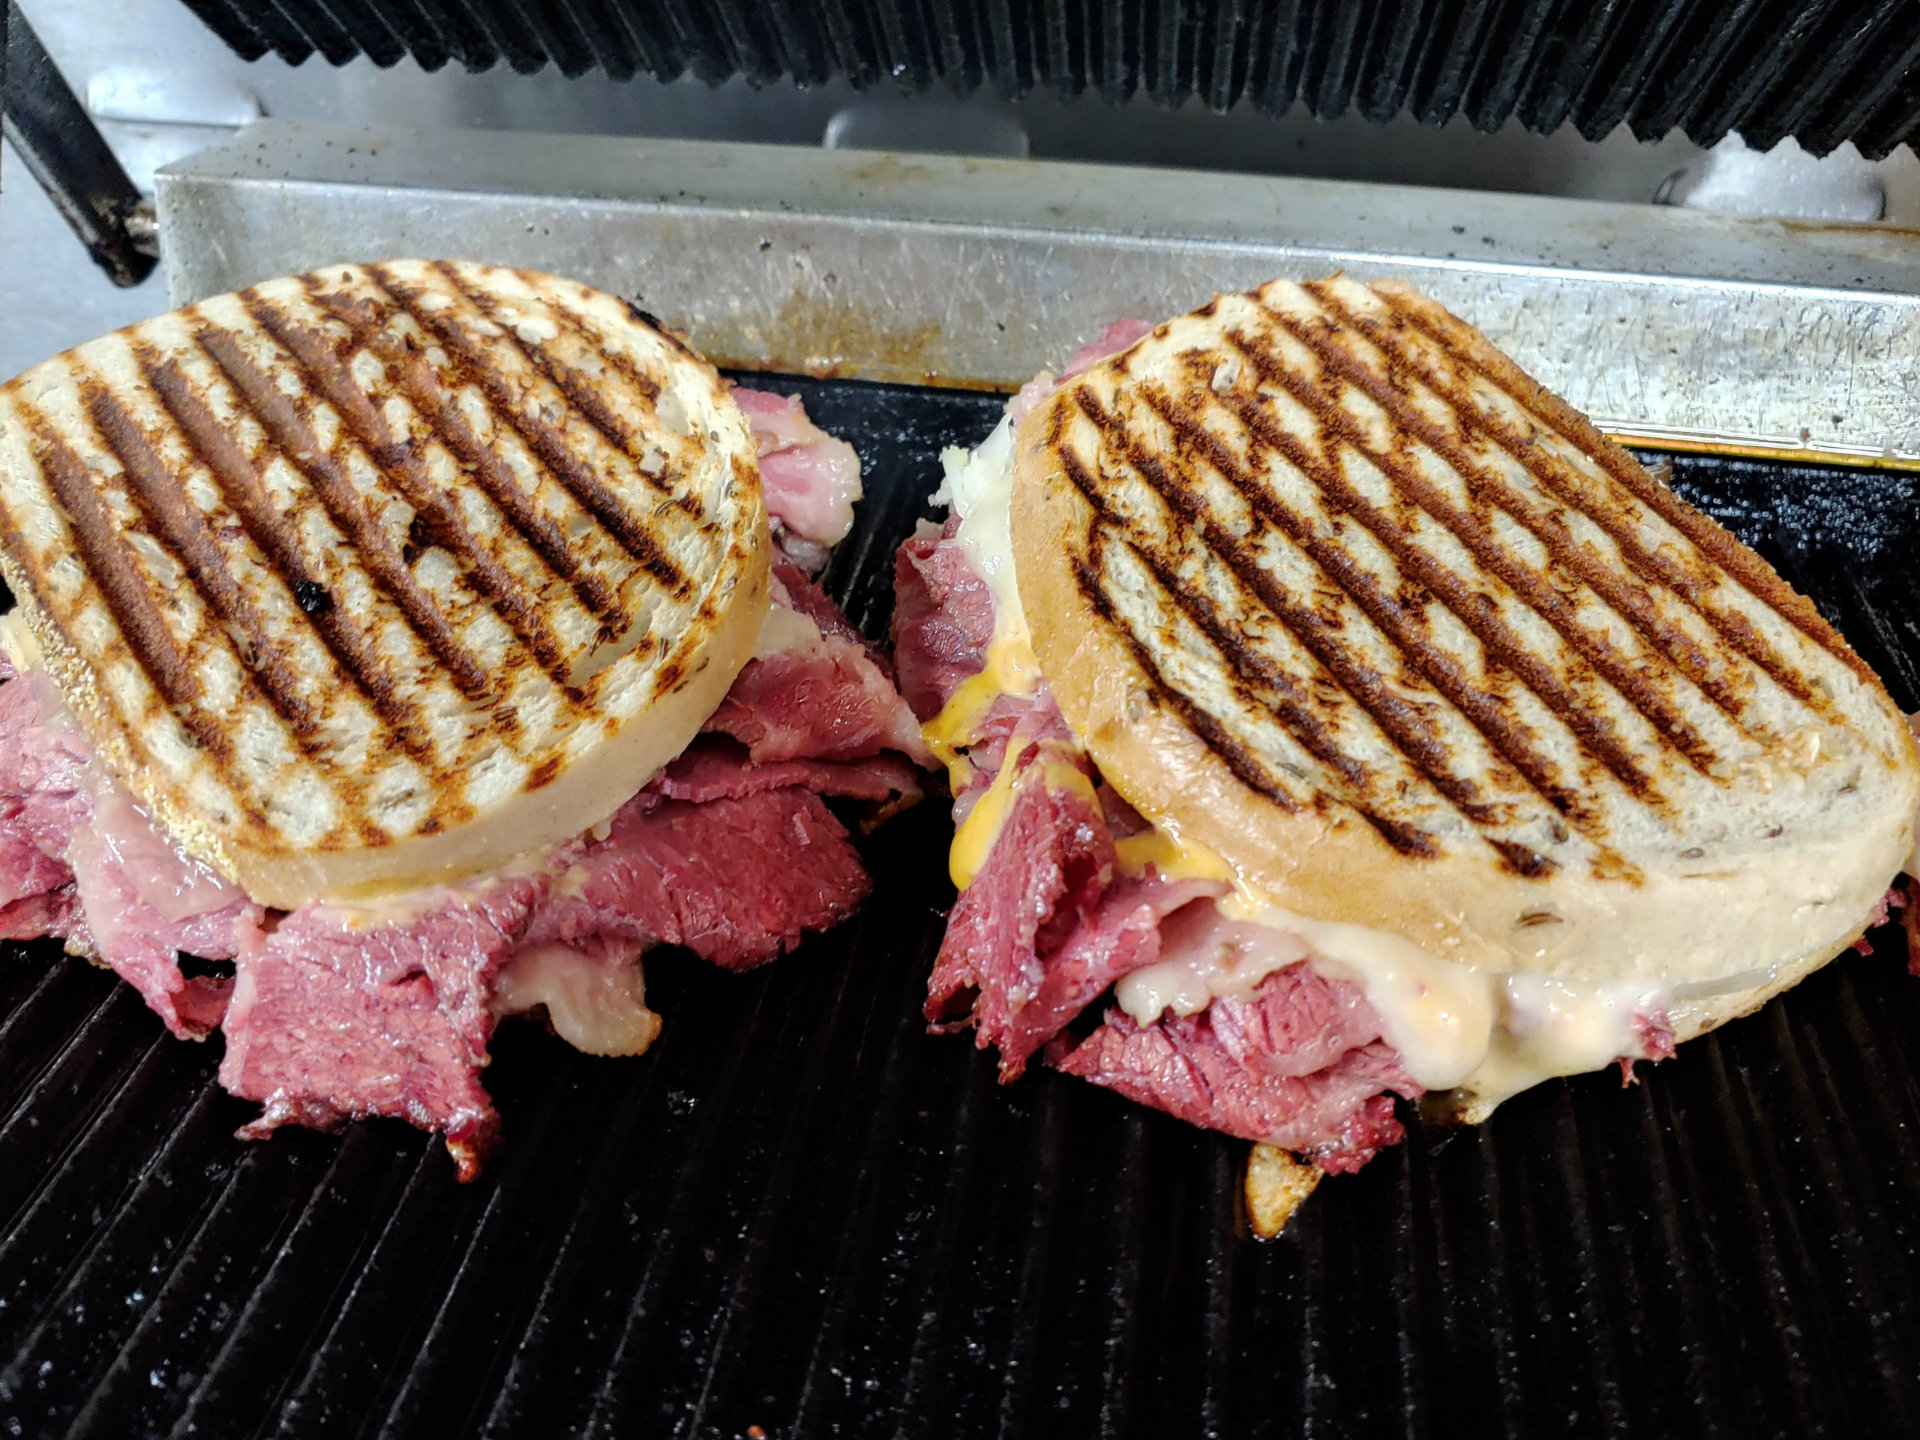 The Reuben on the Grill